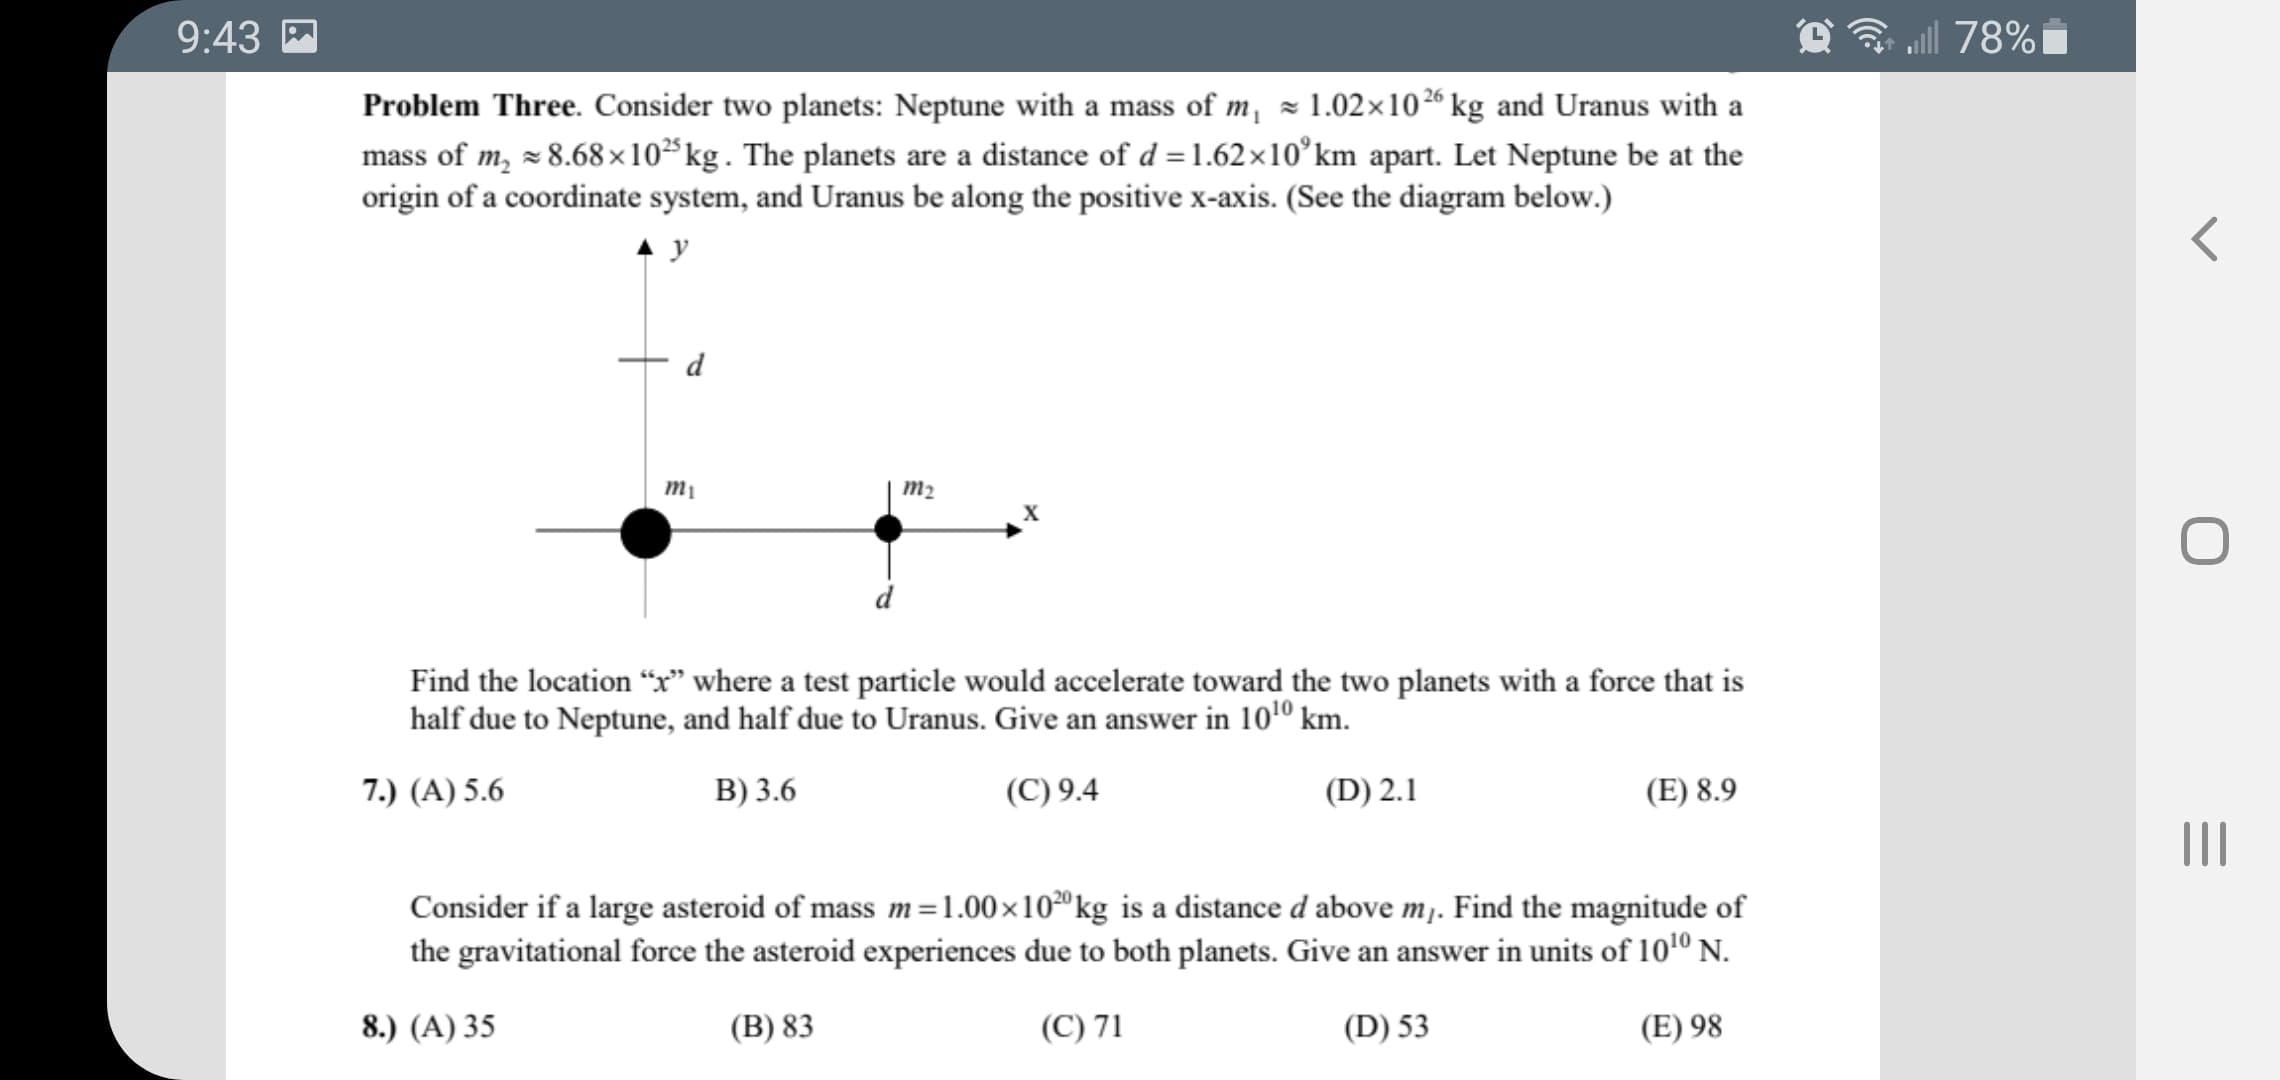 ll
Problem Three. Consider two planets: Neptune with a mass of m, × 1.02×10% kg and Uranus with a
mass of m, = 8.68 x10*kg. The planets are a distance of d =1.62×10°km apart. Let Neptune be at the
origin of a coordinate system, and Uranus be along the positive x-axis. (See the diagram below.)
m2
X
Find the location "x" where a test particle would accelerate toward the two planets with a force that is
half due to Neptune, and half due to Uranus. Give an answer in 1010 km.
7.) (A) 5.6
B) 3.6
(C) 9.4
(D) 2.1
(E) 8.9
Consider if a large asteroid of mass m =1.00×10²ºkg is a distance d above m. Find the magnitude of
the gravitational force the asteroid experiences due to both planets. Give an answer in units of 1010 N.
8.) (A) 35
(B) 83
(C) 71
(D) 53
(E) 98
